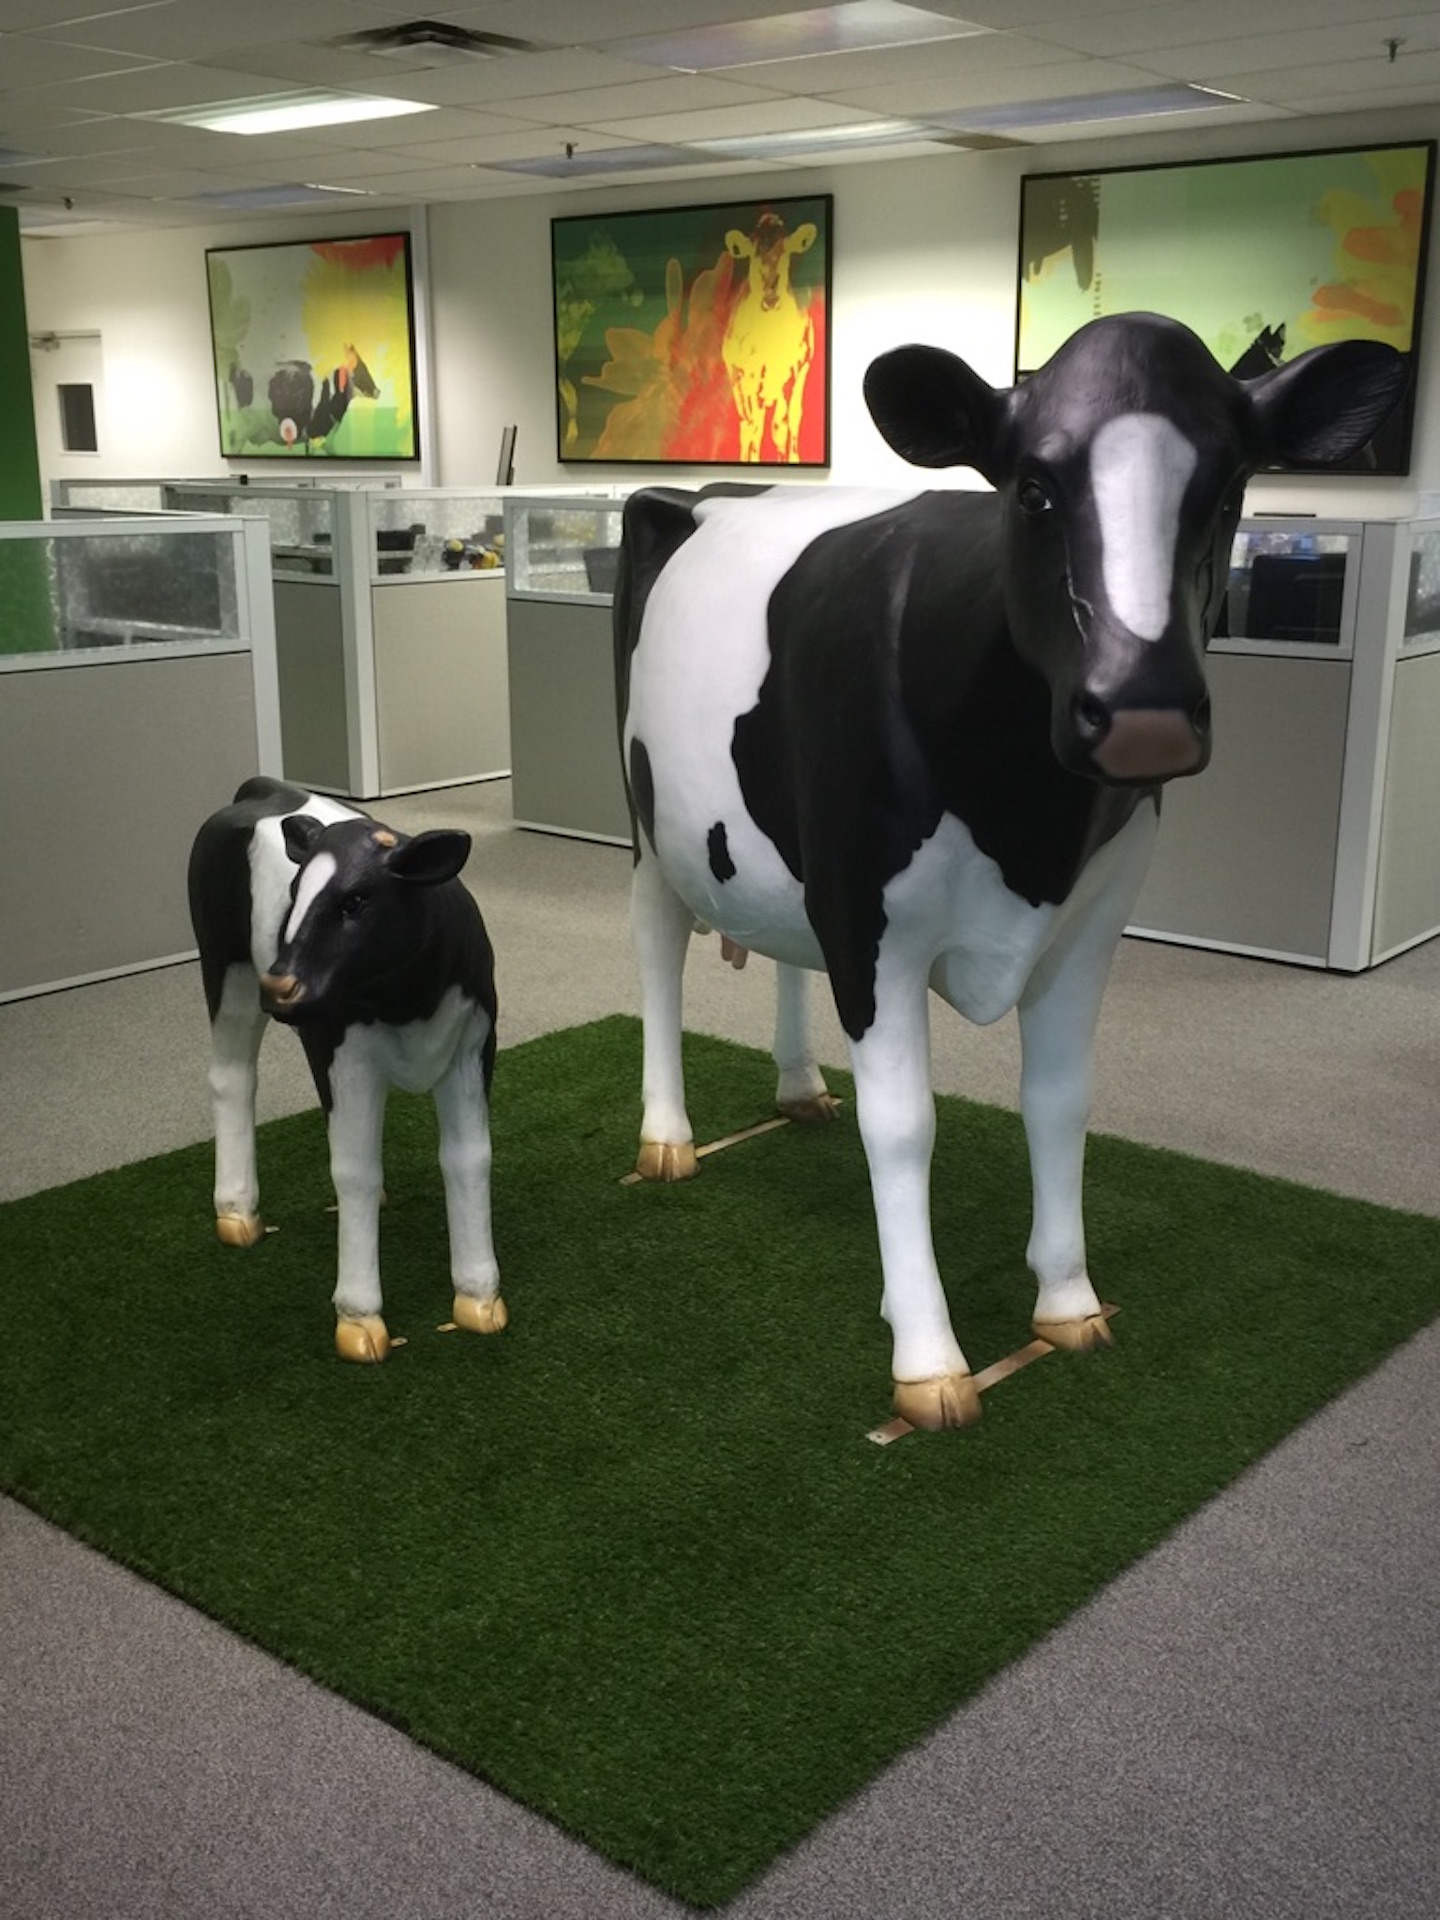 Custom cow display installed in an office.